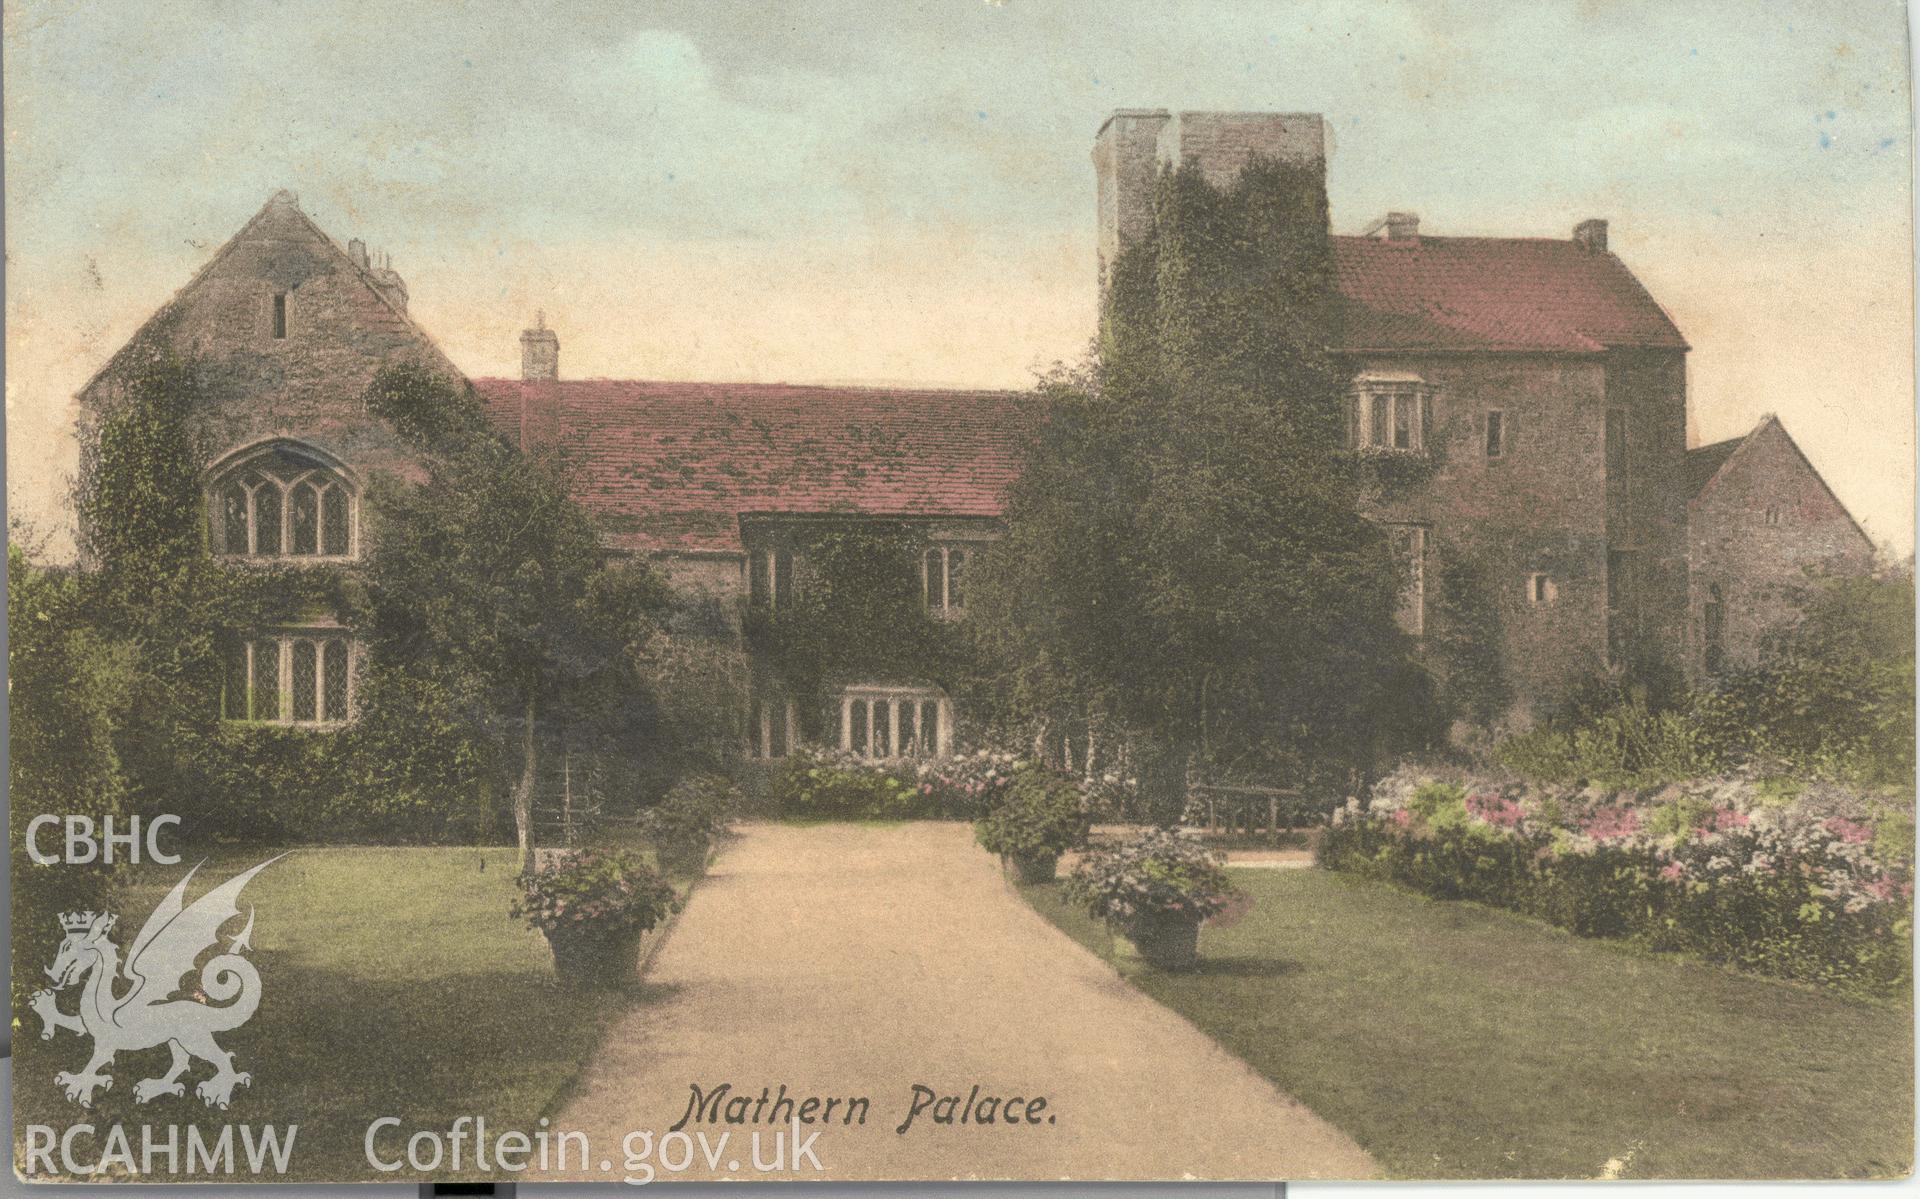 Digitised postcard image of Mathern Palace, F. Frith & Co., Ltd. Produced by Parks and Gardens Data Services, from an original item in the Peter Davis Collection at Parks and Gardens UK. We hold only web-resolution images of this collection, suitable for viewing on screen and for research purposes only. We do not hold the original images, or publication quality scans.